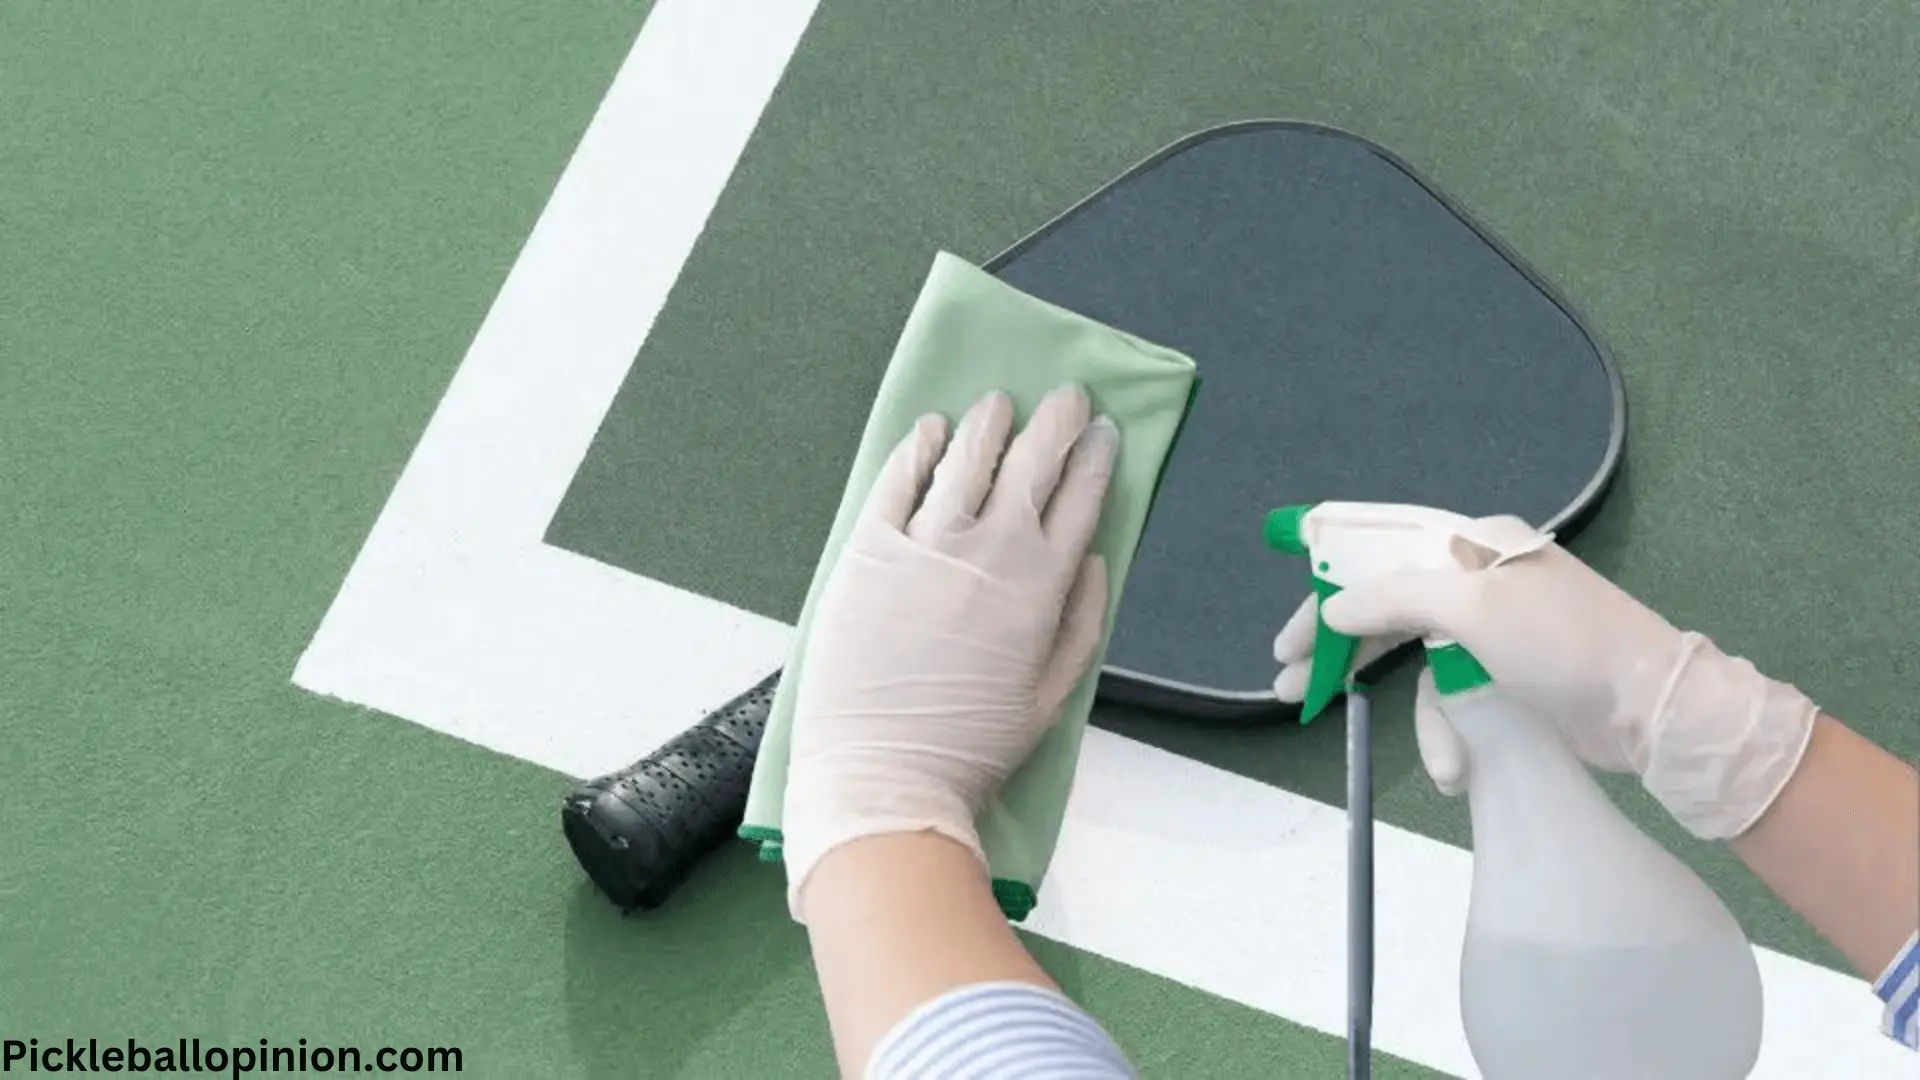 How to Clean Pickleball Paddle In 3 Steps